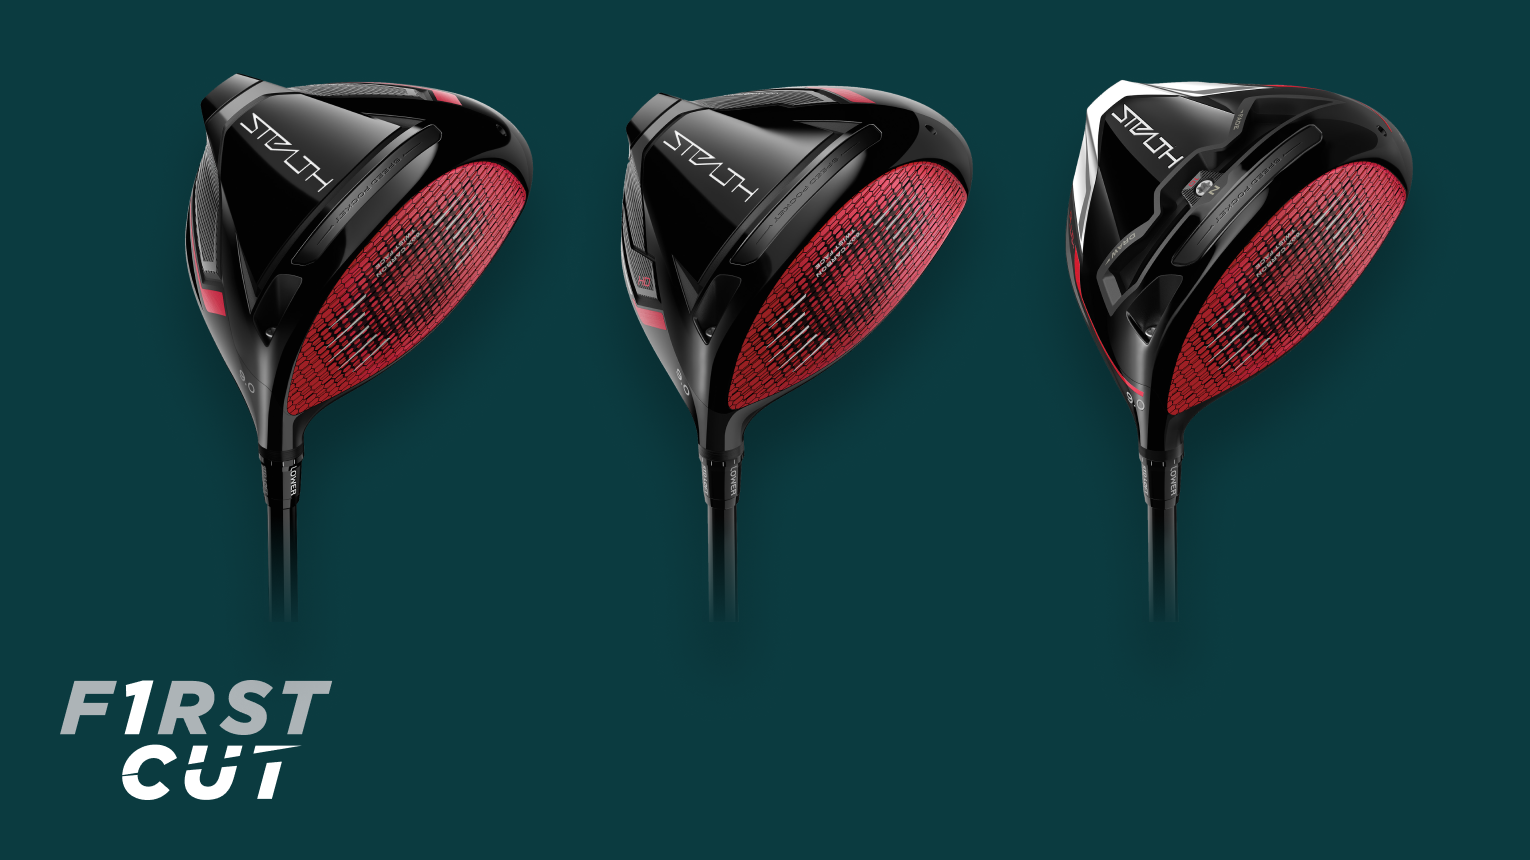 TaylorMade Stealth drivers: What you need to know | Golf Equipment